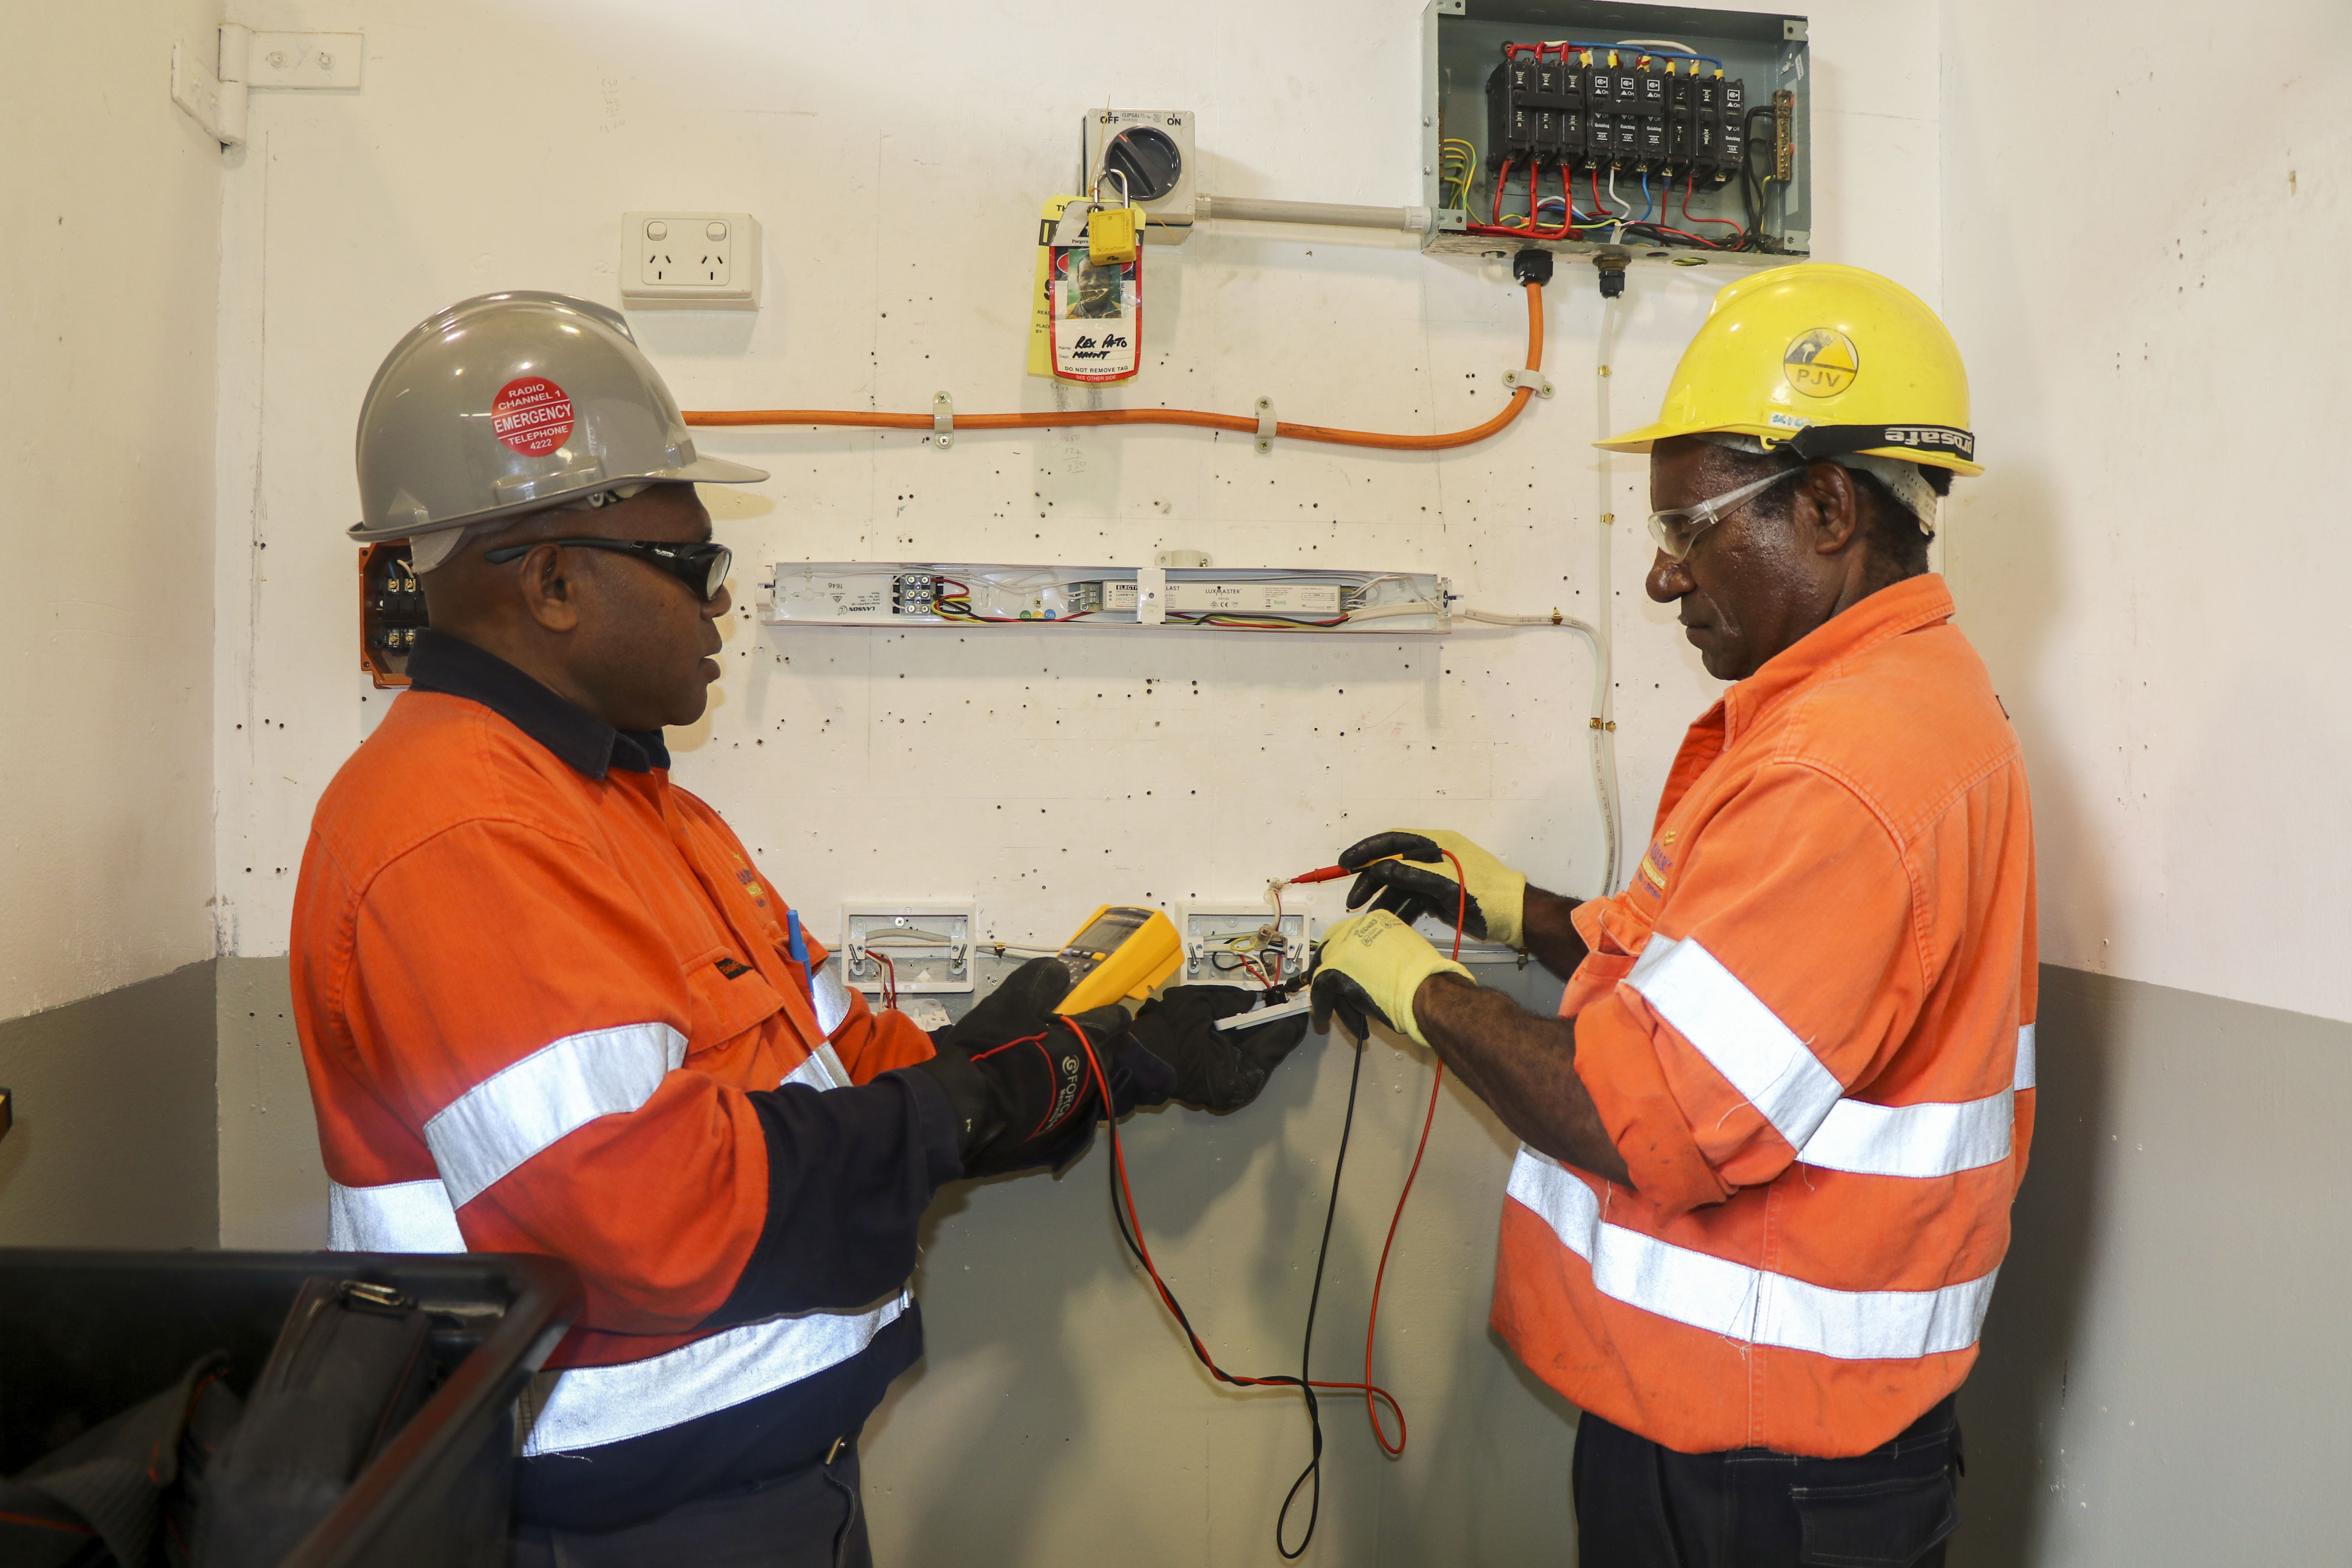 A PJV electrical trade test candidate (right) prepares equipment for electrical installation under the watchful eyes of trainer Tommy Aselai